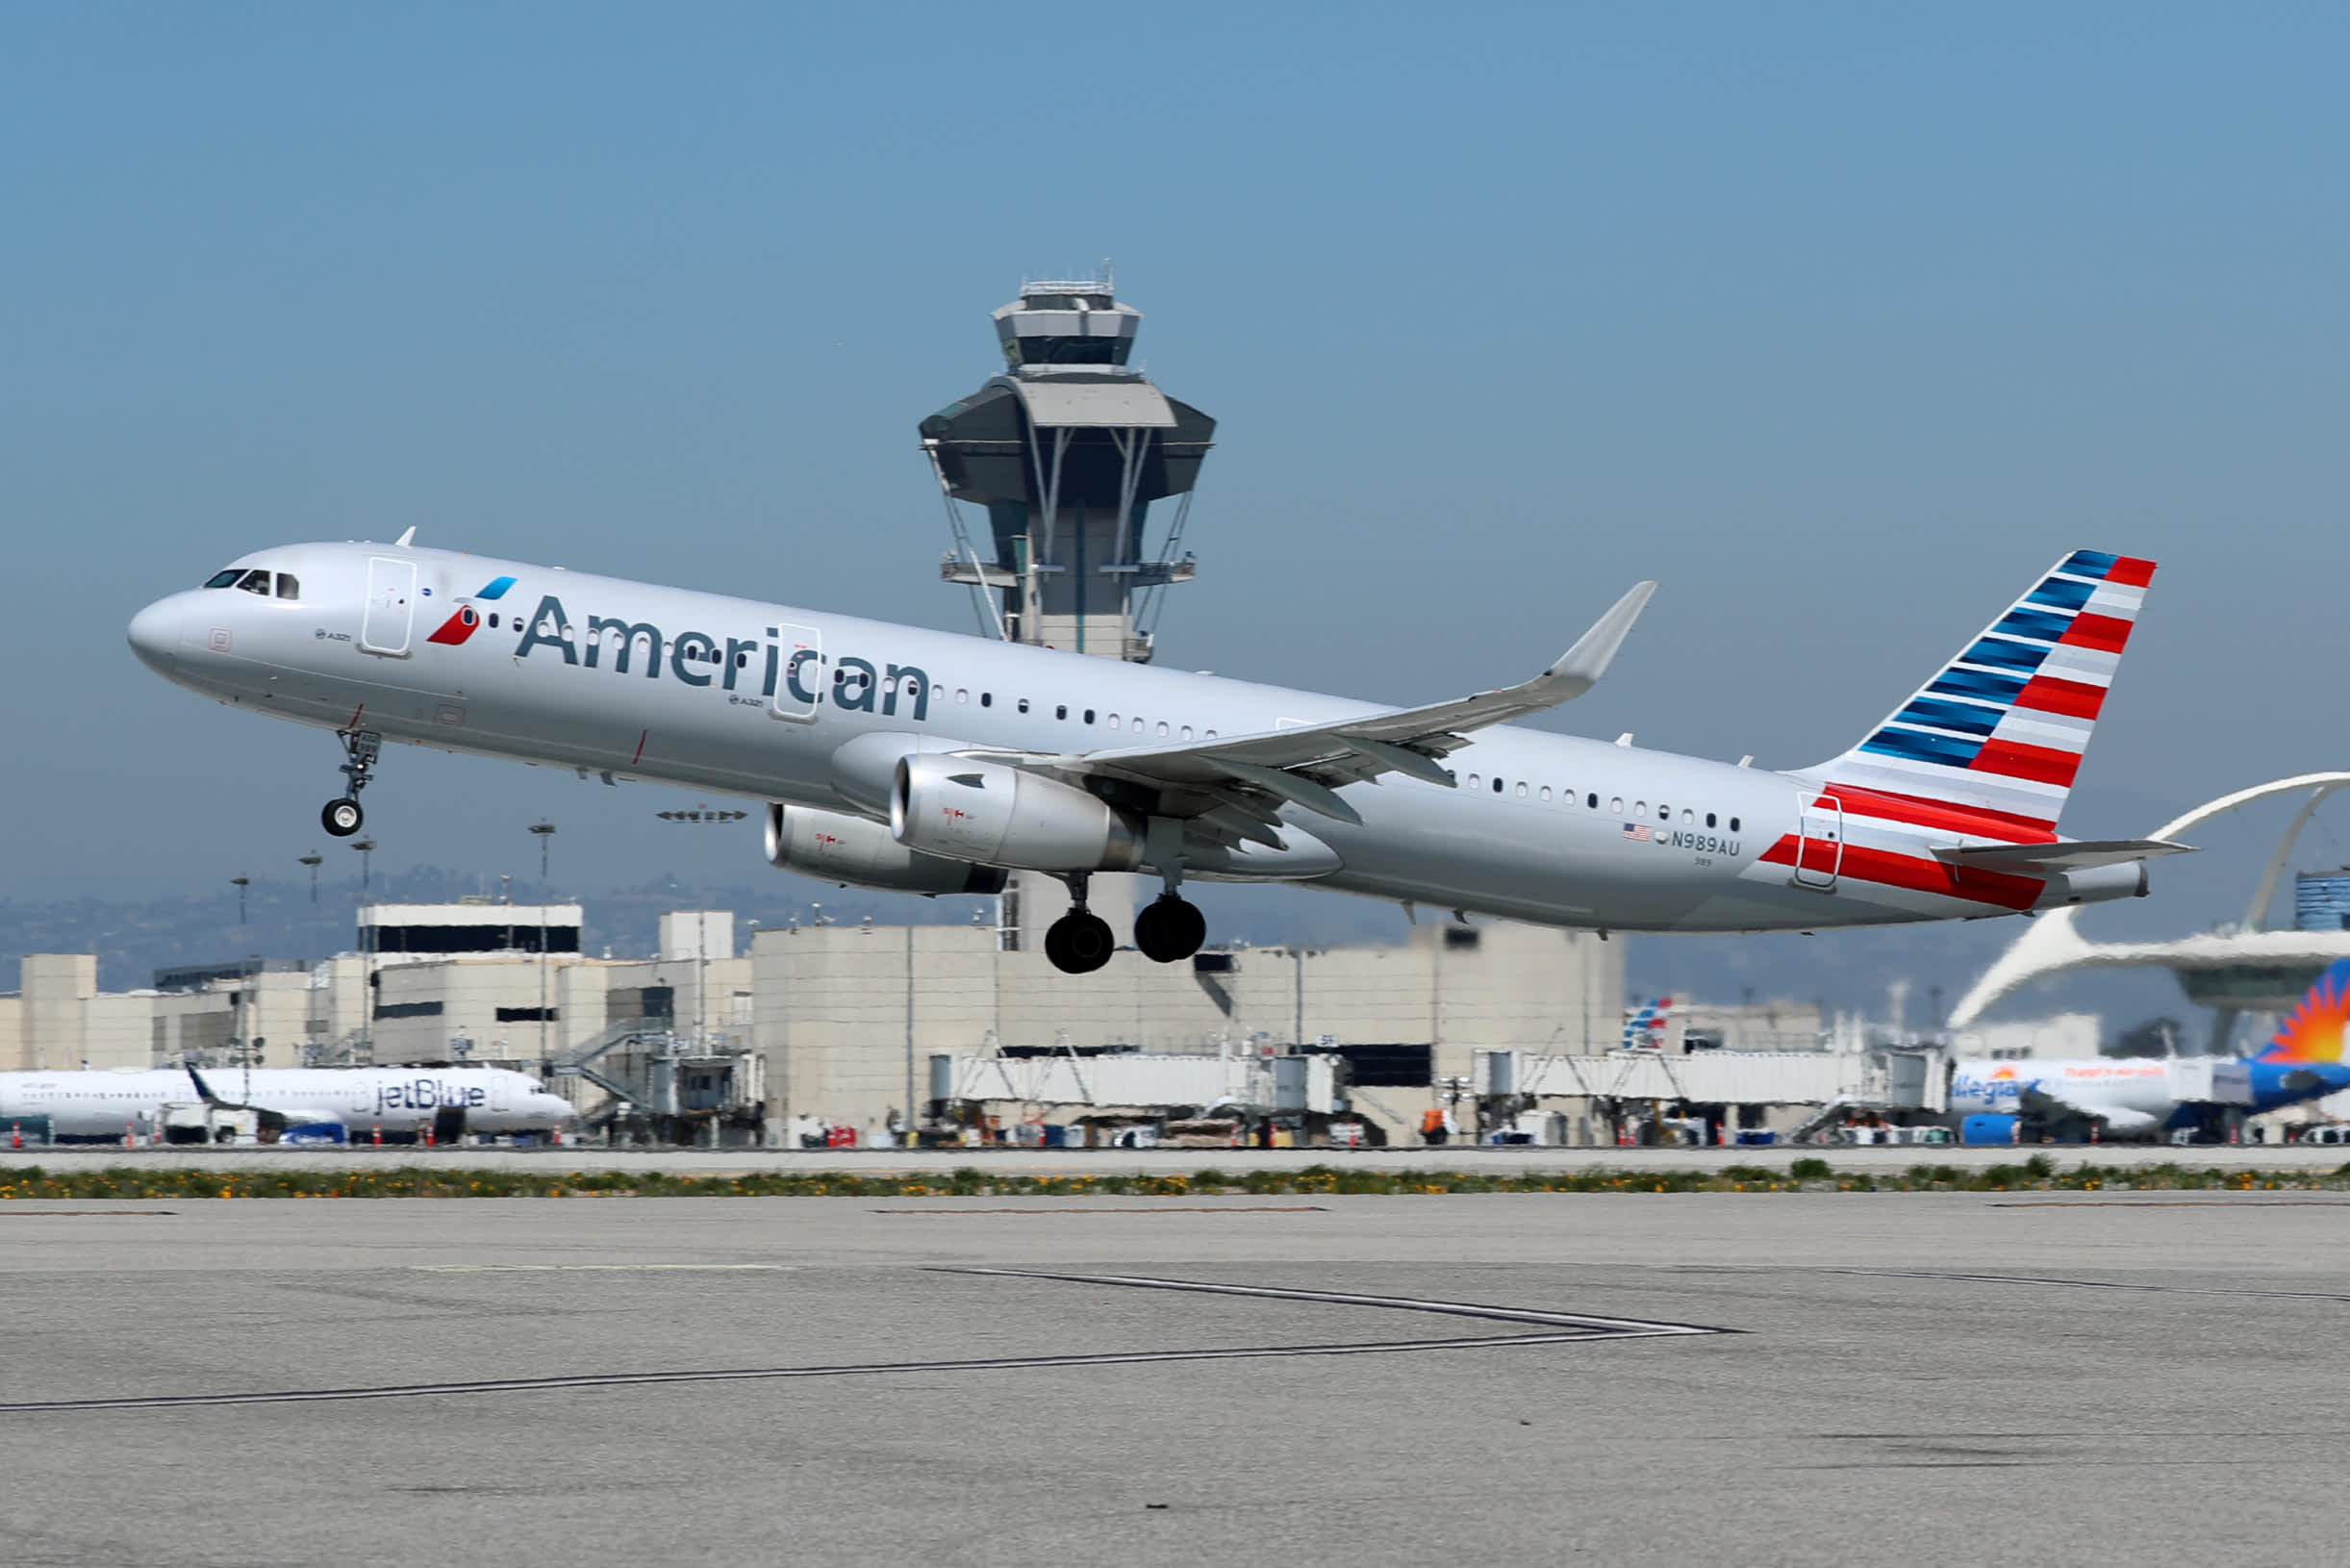 American Airways surges after better-than-expected earnings, squeezing quick sellers